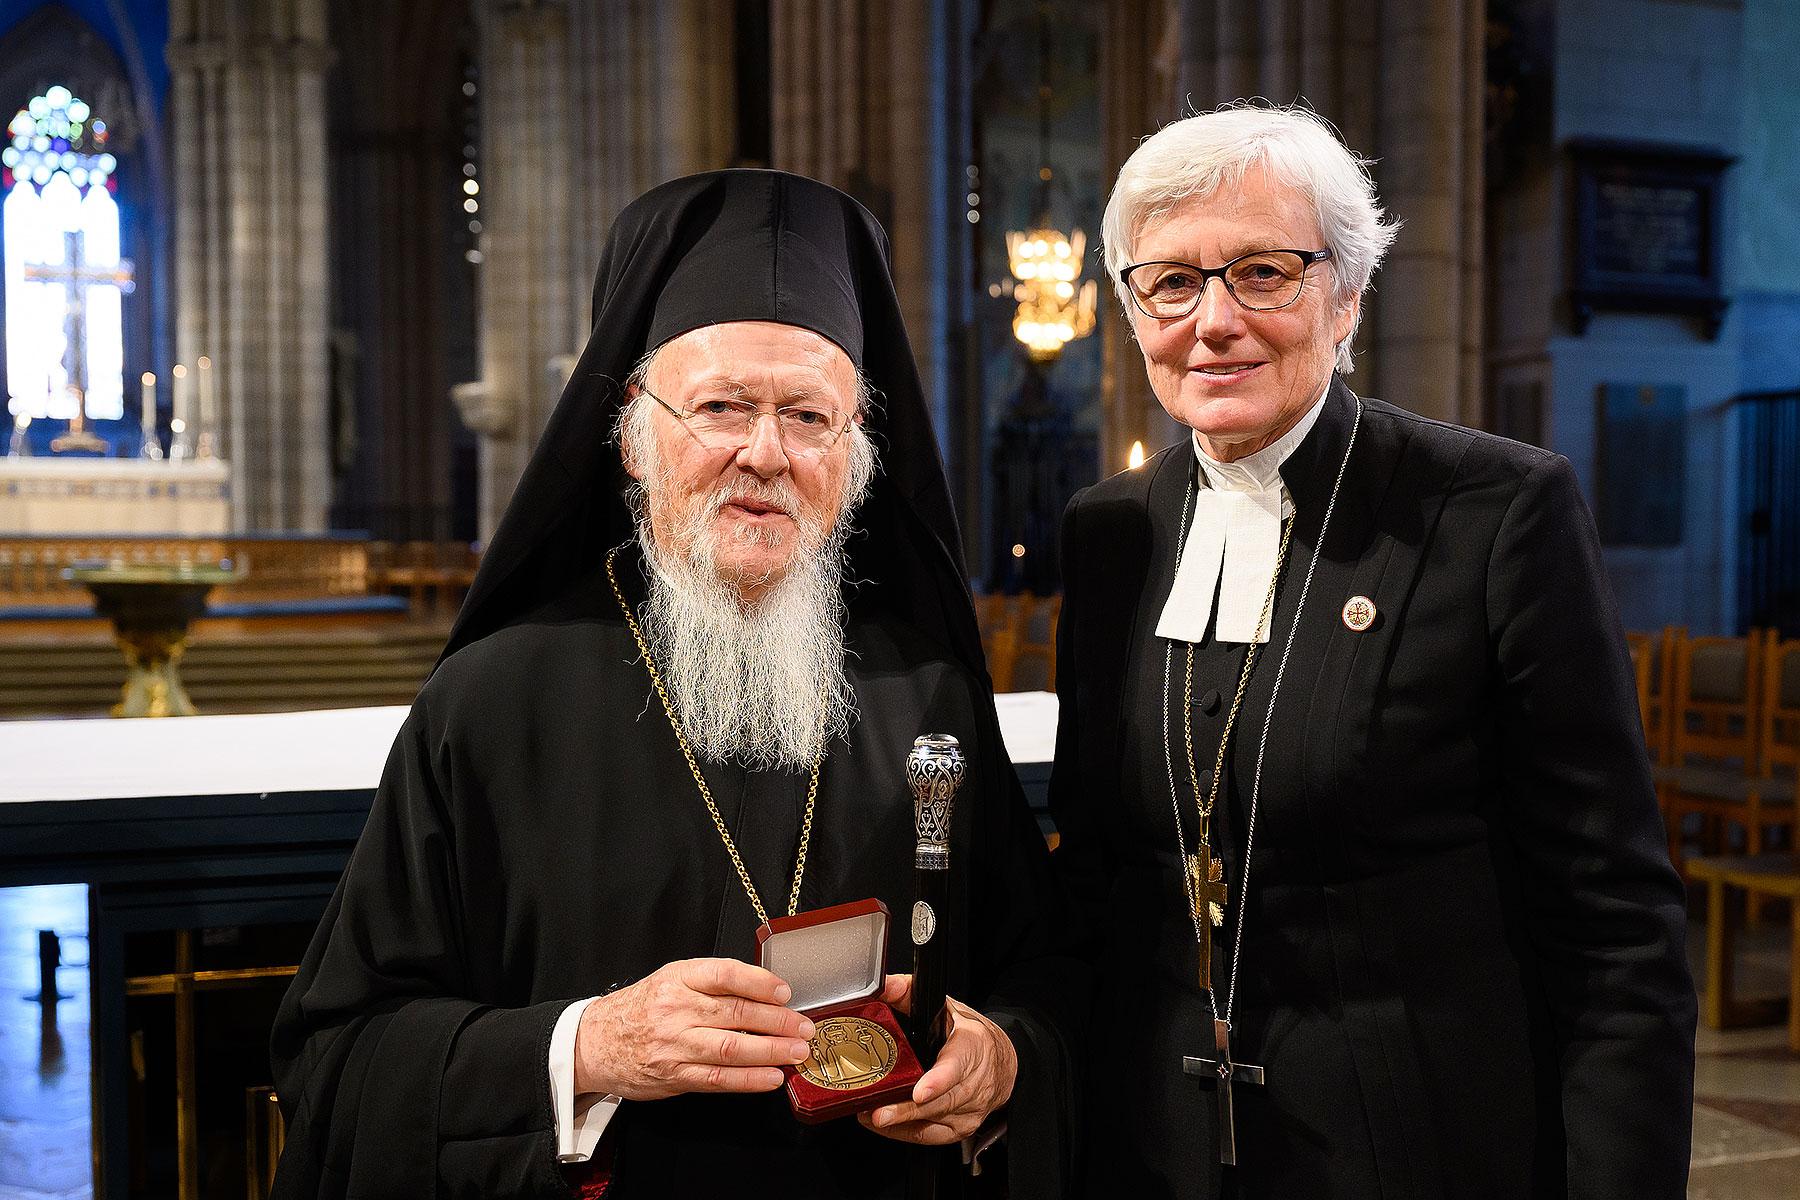 The Ecumenical Patriarch Bartholomeus I, leader of the Eastern Orthodox Christians in the world, was awarded the plaque of St. Eric's by Archbishop Antje JackelÃ©n. Photo: Magnus Aronson /Ikon 